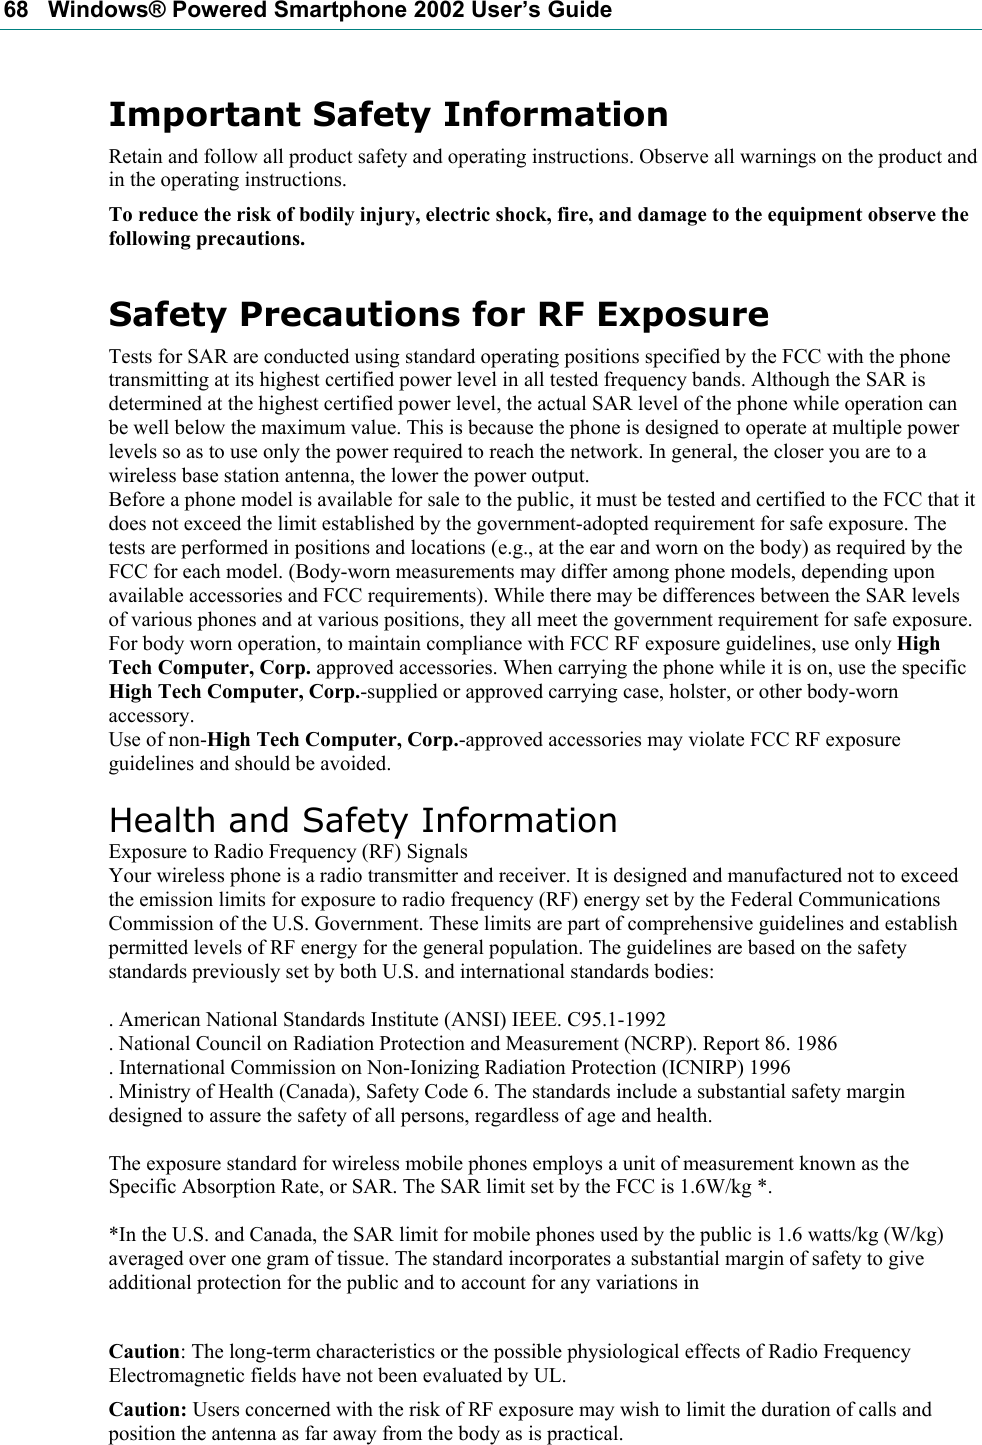 68   Windows® Powered Smartphone 2002 User’s Guide Important Safety Information Retain and follow all product safety and operating instructions. Observe all warnings on the product and in the operating instructions. To reduce the risk of bodily injury, electric shock, fire, and damage to the equipment observe the following precautions. Safety Precautions for RF Exposure Tests for SAR are conducted using standard operating positions specified by the FCC with the phone transmitting at its highest certified power level in all tested frequency bands. Although the SAR is determined at the highest certified power level, the actual SAR level of the phone while operation can be well below the maximum value. This is because the phone is designed to operate at multiple power levels so as to use only the power required to reach the network. In general, the closer you are to a wireless base station antenna, the lower the power output. Before a phone model is available for sale to the public, it must be tested and certified to the FCC that it does not exceed the limit established by the government-adopted requirement for safe exposure. The tests are performed in positions and locations (e.g., at the ear and worn on the body) as required by the FCC for each model. (Body-worn measurements may differ among phone models, depending upon available accessories and FCC requirements). While there may be differences between the SAR levels of various phones and at various positions, they all meet the government requirement for safe exposure. For body worn operation, to maintain compliance with FCC RF exposure guidelines, use only High Tech Computer, Corp. approved accessories. When carrying the phone while it is on, use the specific High Tech Computer, Corp.-supplied or approved carrying case, holster, or other body-worn accessory. Use of non-High Tech Computer, Corp.-approved accessories may violate FCC RF exposure guidelines and should be avoided.  Health and Safety Information Exposure to Radio Frequency (RF) Signals Your wireless phone is a radio transmitter and receiver. It is designed and manufactured not to exceed the emission limits for exposure to radio frequency (RF) energy set by the Federal Communications Commission of the U.S. Government. These limits are part of comprehensive guidelines and establish permitted levels of RF energy for the general population. The guidelines are based on the safety standards previously set by both U.S. and international standards bodies:  . American National Standards Institute (ANSI) IEEE. C95.1-1992 . National Council on Radiation Protection and Measurement (NCRP). Report 86. 1986 . International Commission on Non-Ionizing Radiation Protection (ICNIRP) 1996 . Ministry of Health (Canada), Safety Code 6. The standards include a substantial safety margin designed to assure the safety of all persons, regardless of age and health.  The exposure standard for wireless mobile phones employs a unit of measurement known as the Specific Absorption Rate, or SAR. The SAR limit set by the FCC is 1.6W/kg *.  *In the U.S. and Canada, the SAR limit for mobile phones used by the public is 1.6 watts/kg (W/kg) averaged over one gram of tissue. The standard incorporates a substantial margin of safety to give additional protection for the public and to account for any variations in  Caution: The long-term characteristics or the possible physiological effects of Radio Frequency Electromagnetic fields have not been evaluated by UL. Caution: Users concerned with the risk of RF exposure may wish to limit the duration of calls and position the antenna as far away from the body as is practical. 